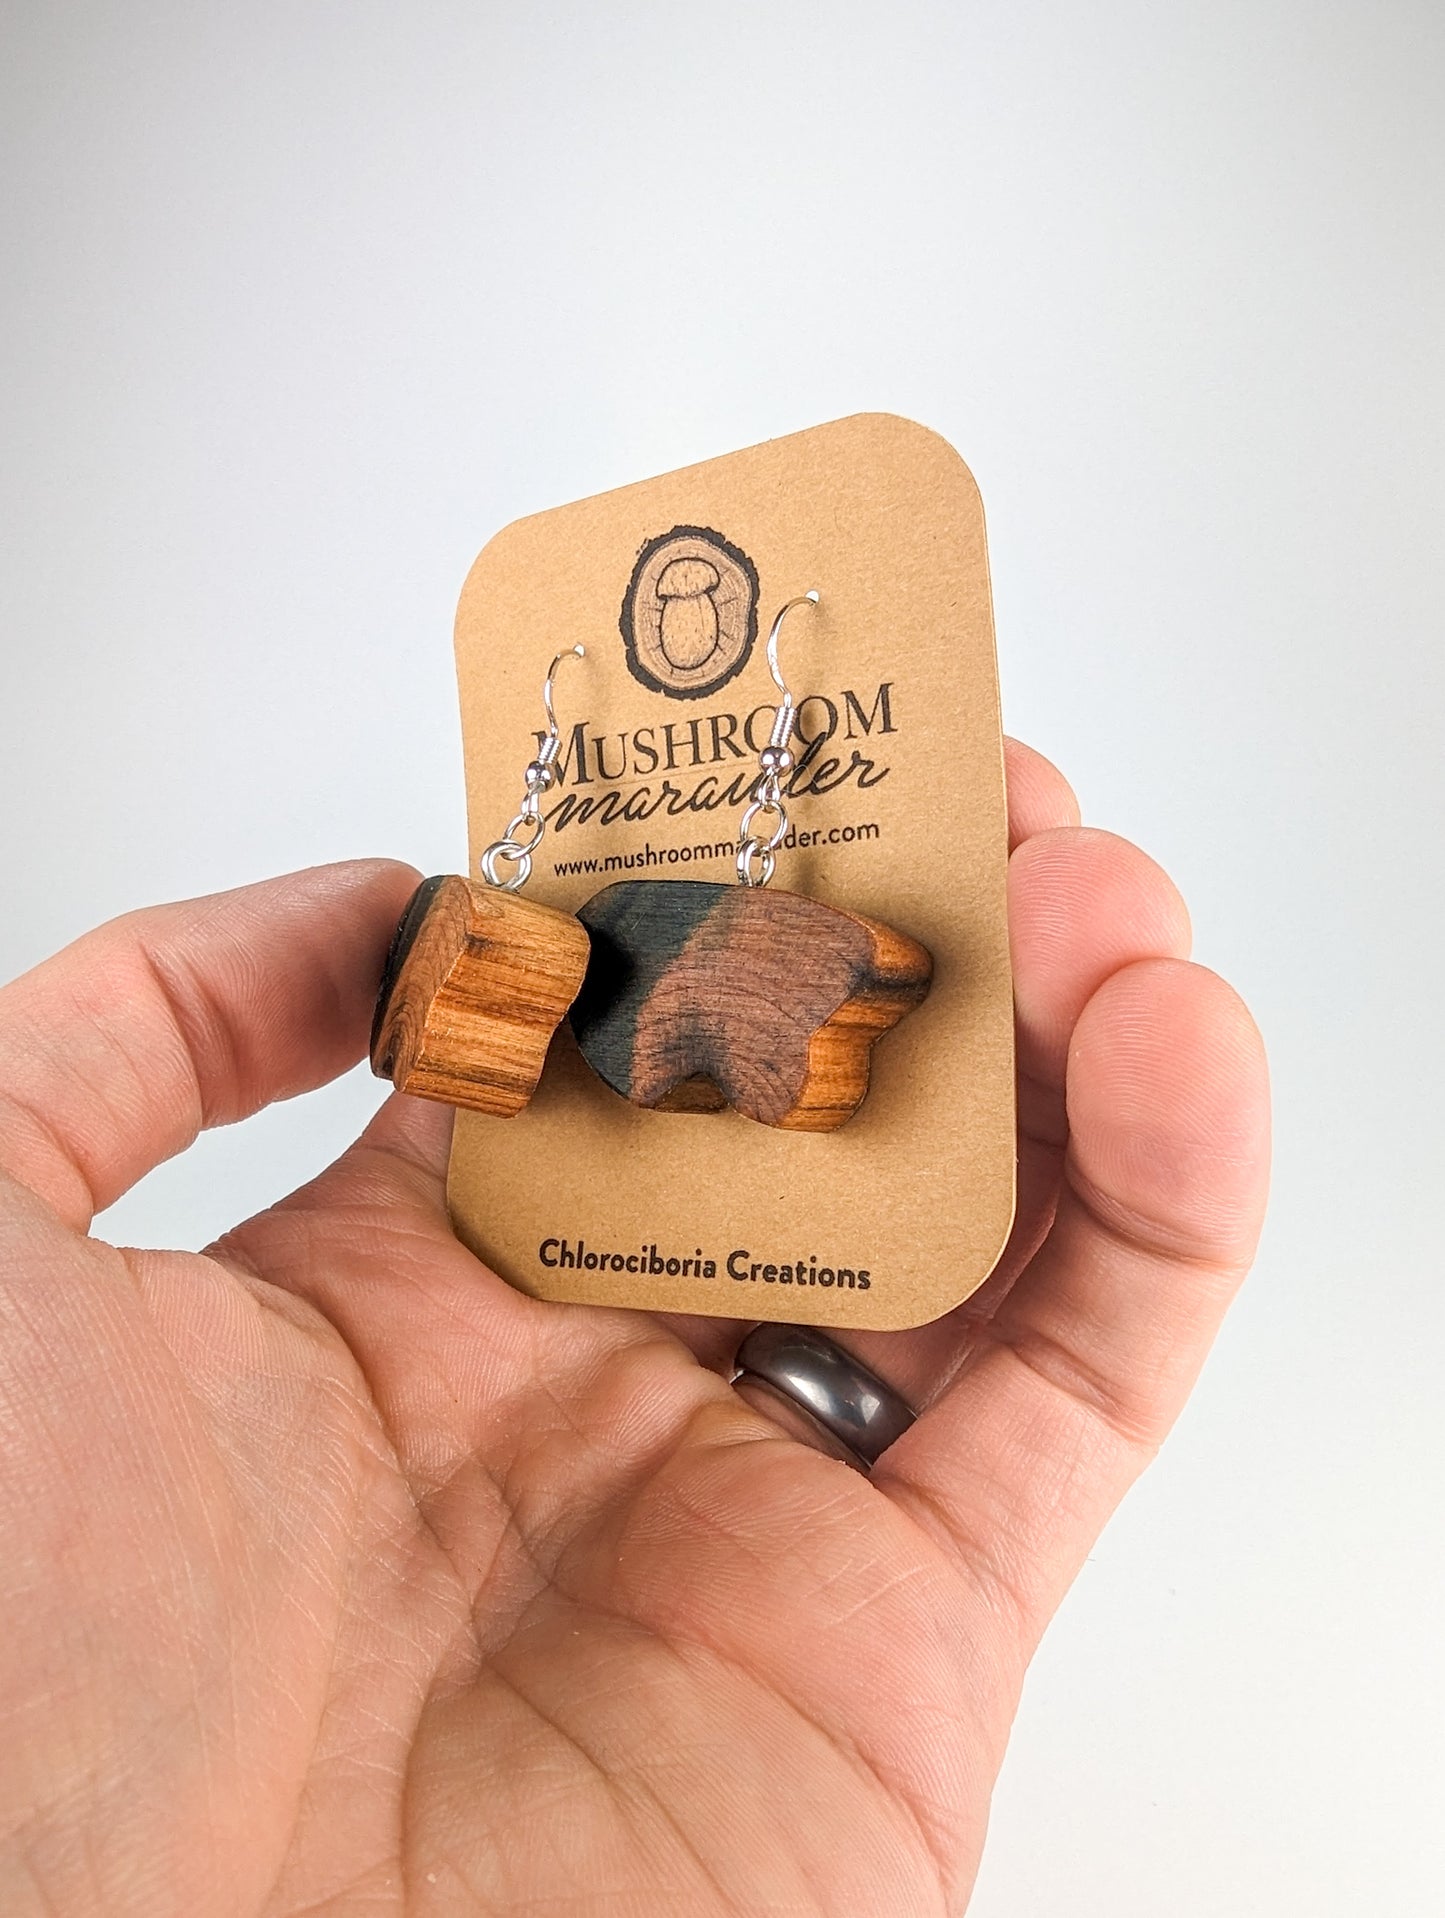 Naturally Fungus-Stained Wooden Earrings | Polar Bears, Maybe? Sure, They're Polar Bears!